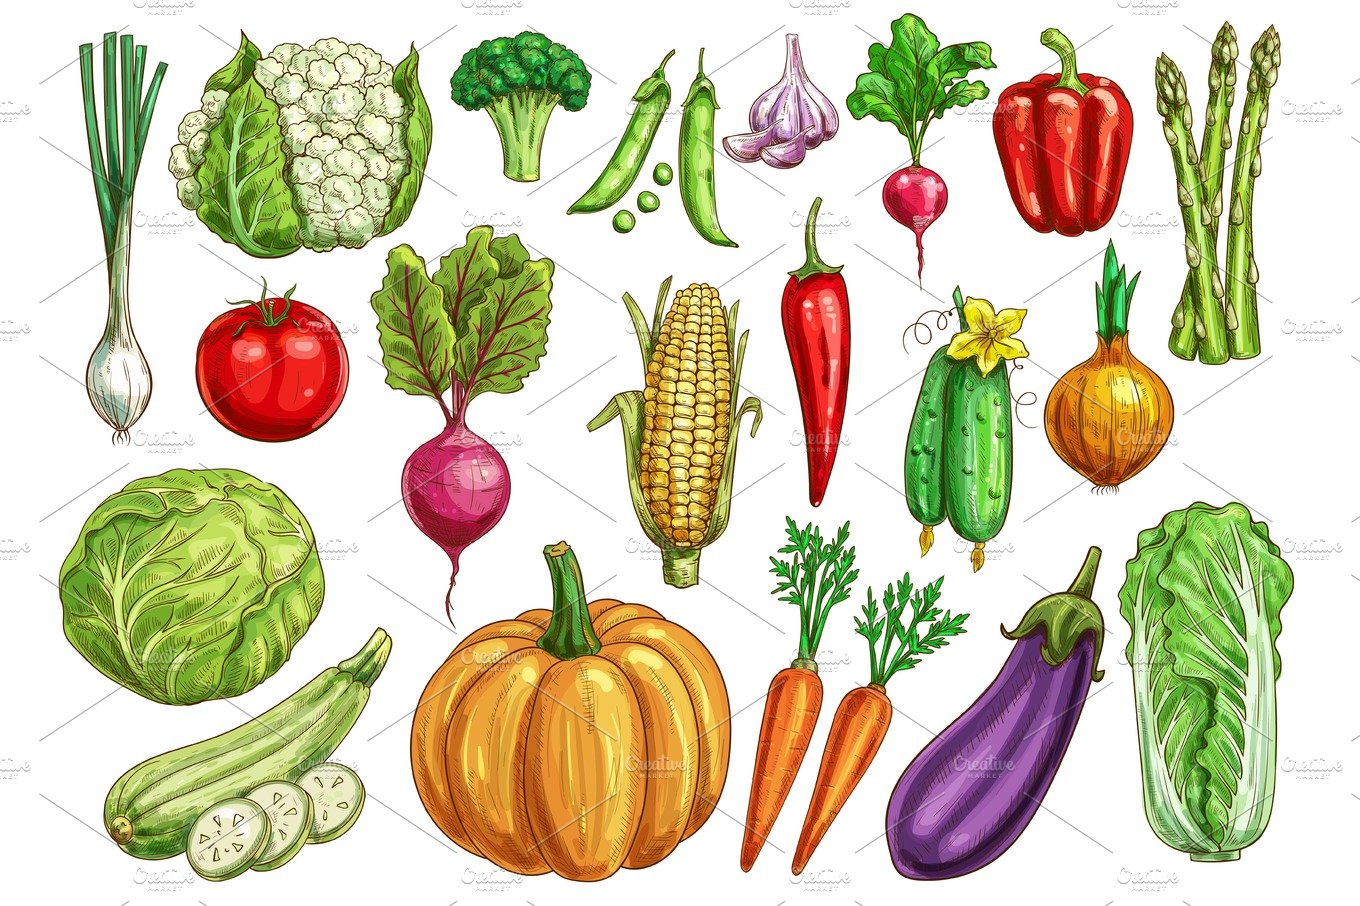 Vegetables isolated sketch set with fresh veggies cover image.